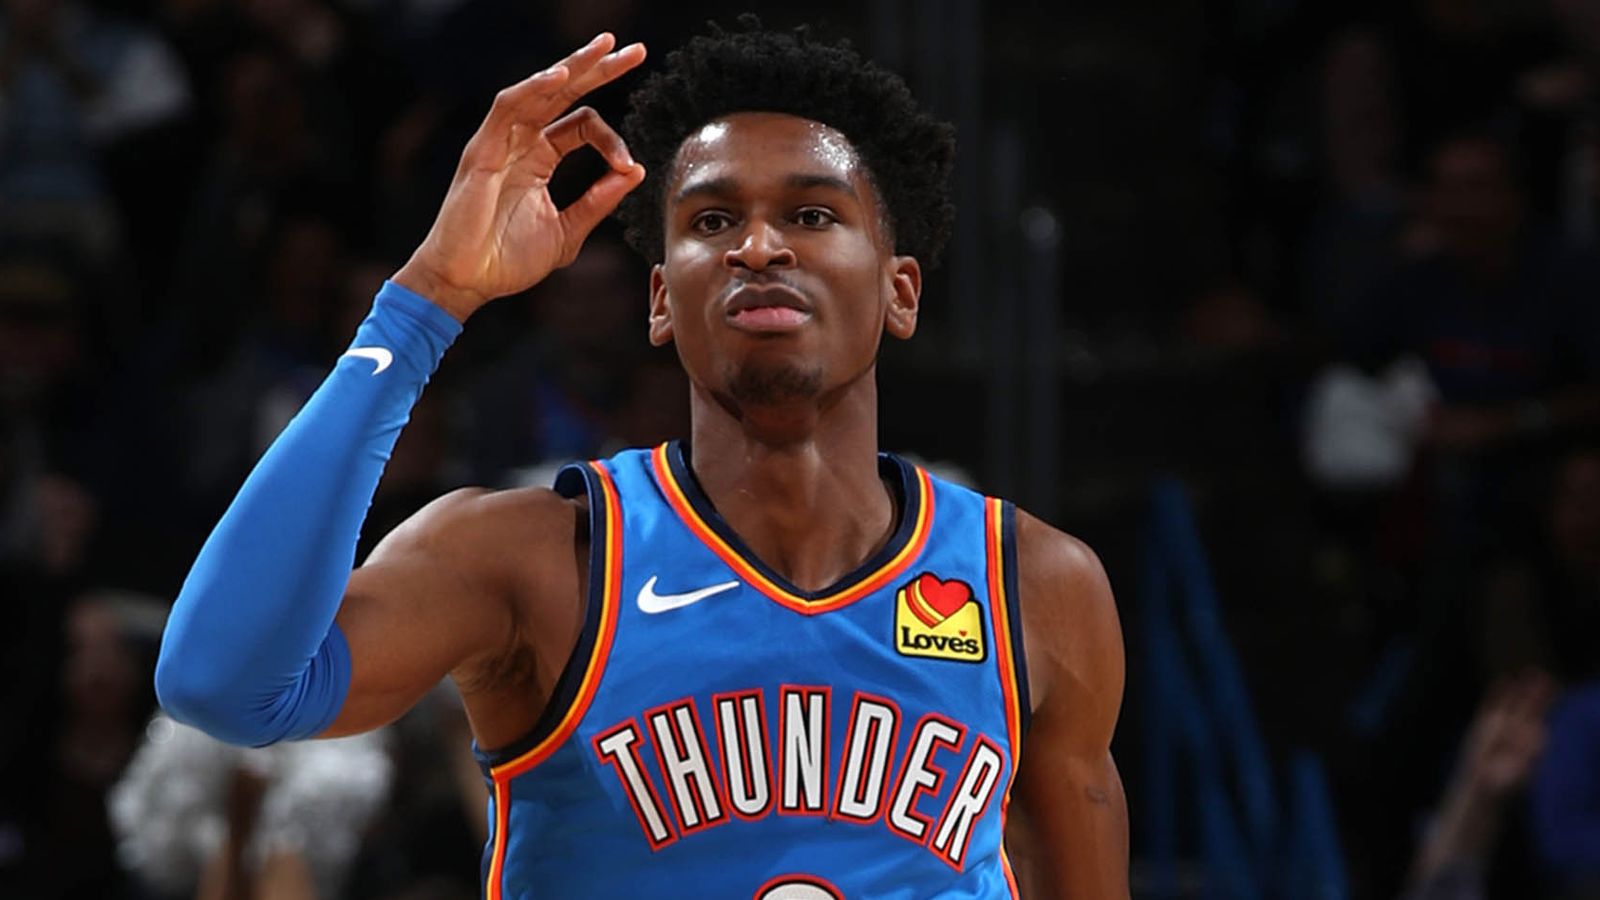 NBA Trade Proposal: James Harden’s exit could motivate the Philadelphia 76ers to pair Joel Embiid with Shai Gilgeous-Alexander